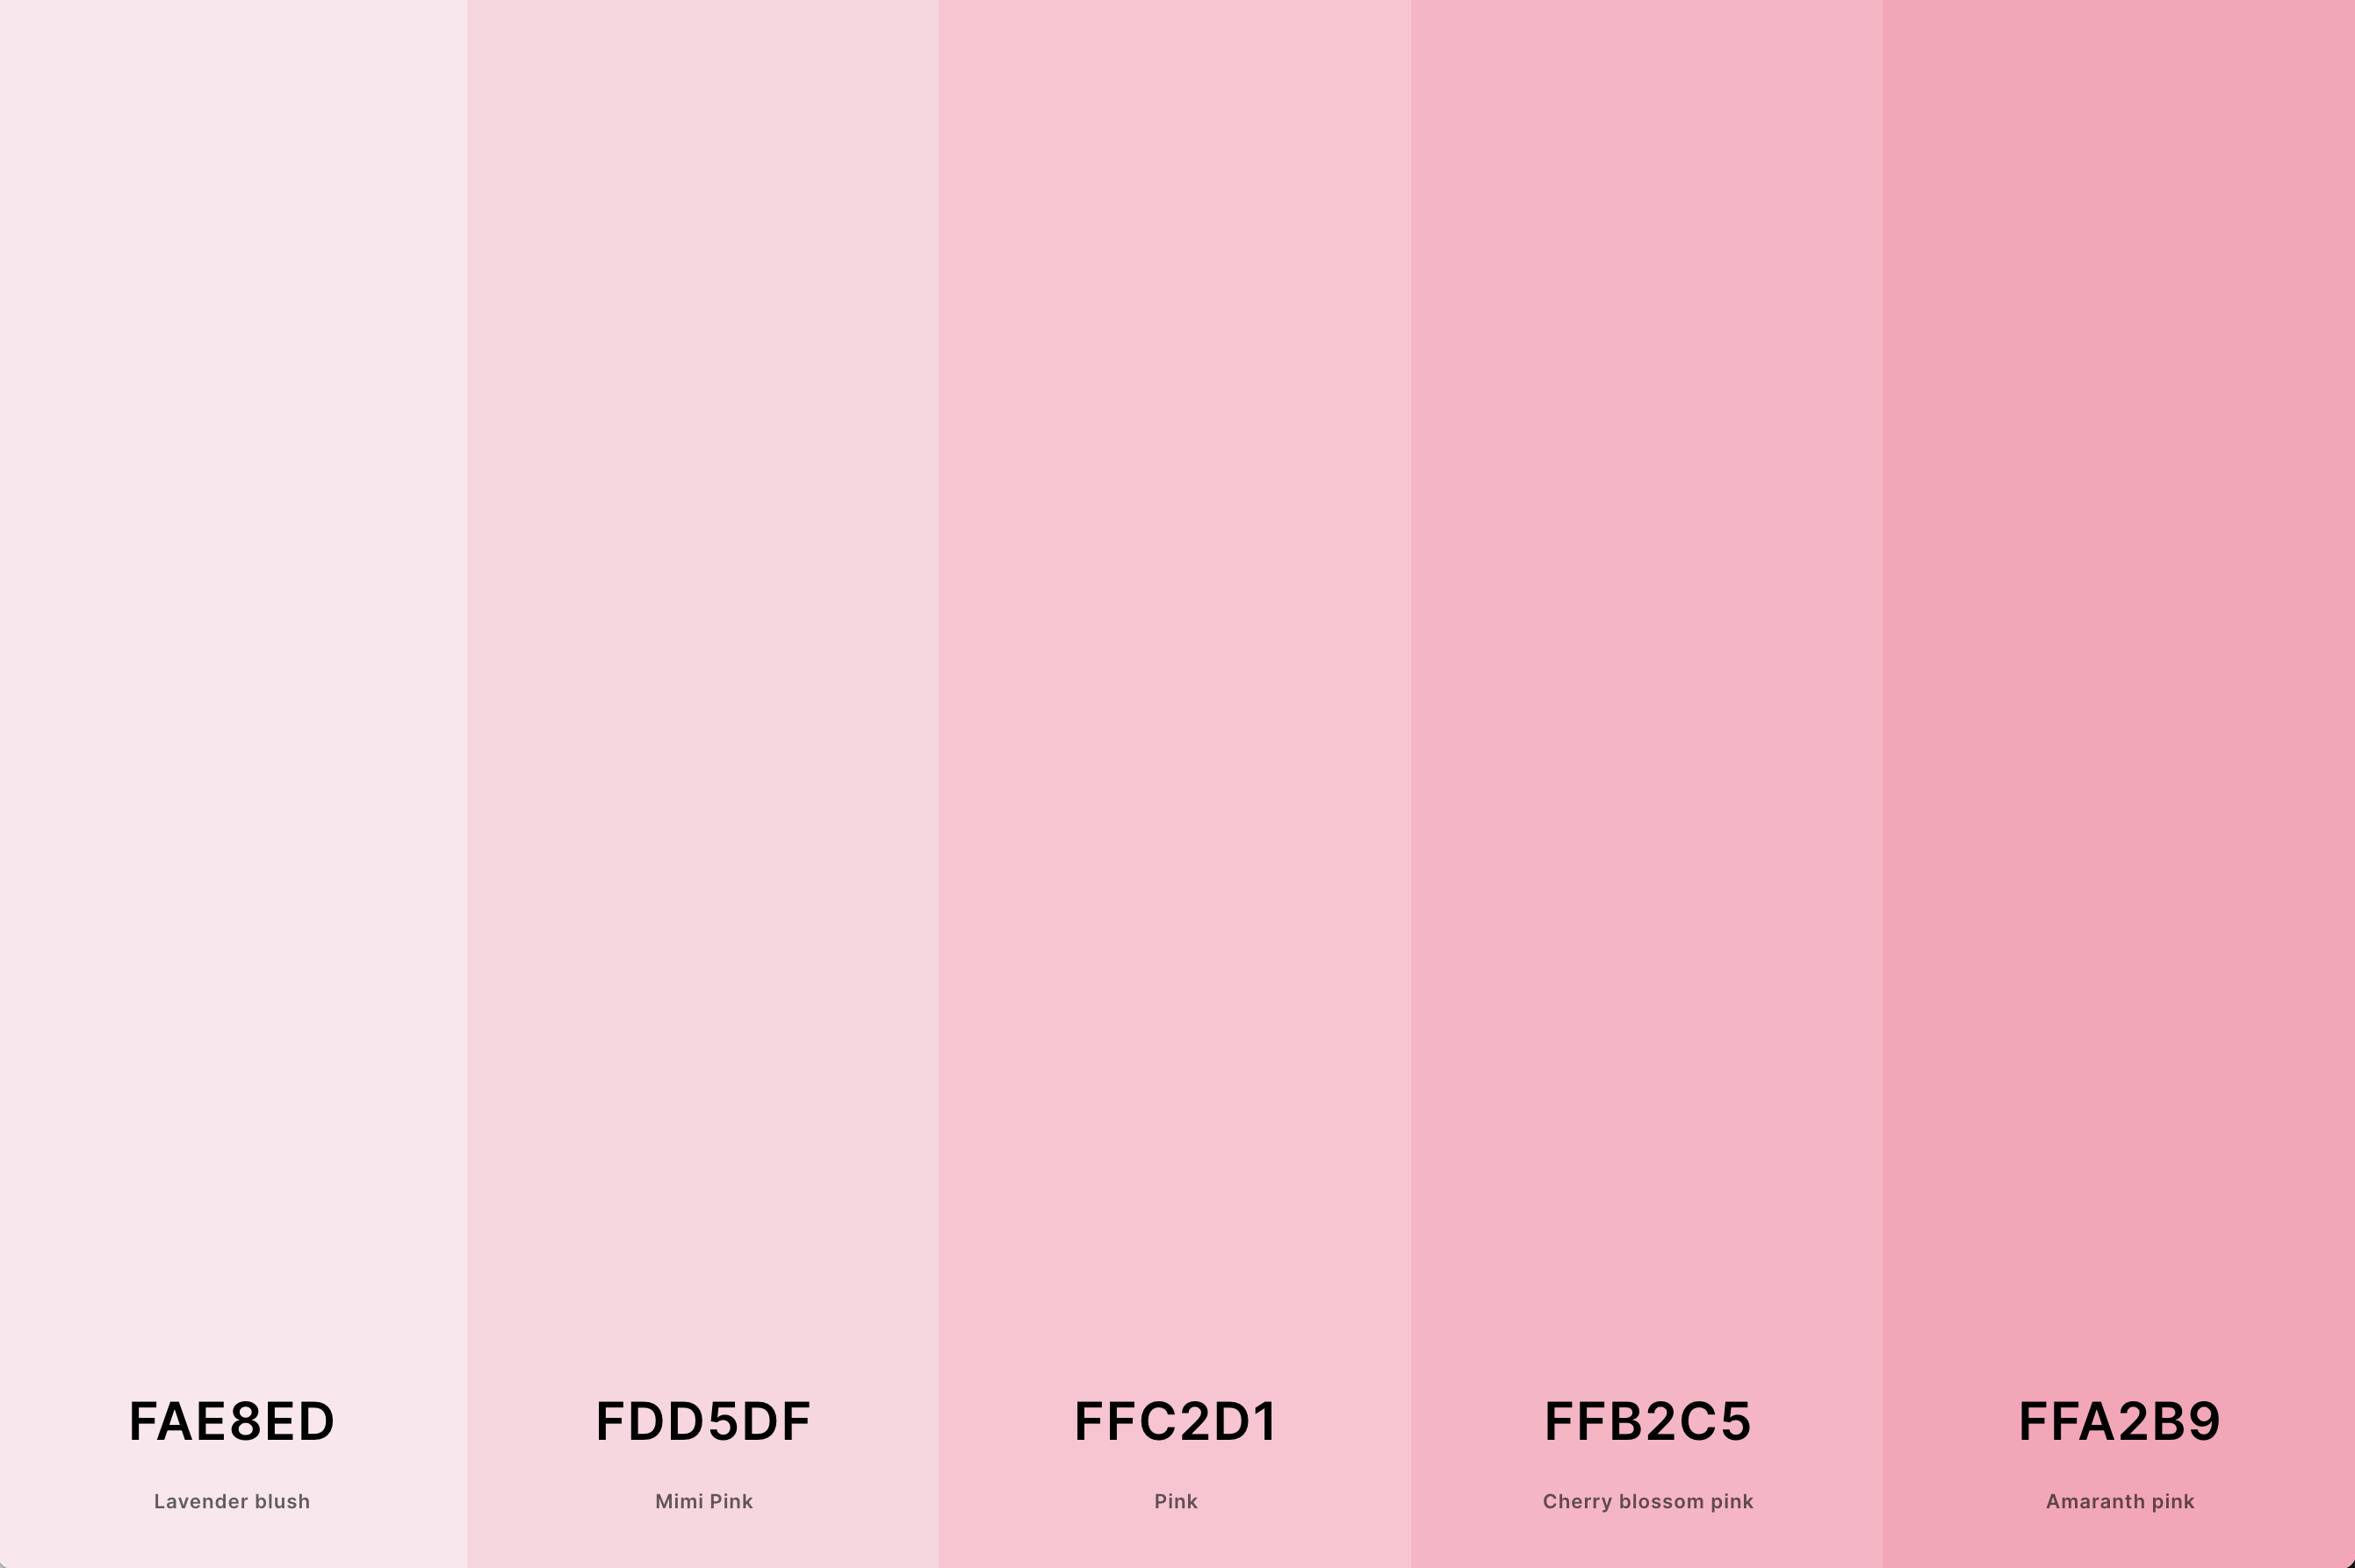 4. Pastel Pink Color Palette Color Palette with Lavender Blush (Hex #FAE8ED) + Mimi Pink (Hex #FDD5DF) + Pink (Hex #FFC2D1) + Cherry Blossom Pink (Hex #FFB2C5) + Amaranth Pink (Hex #FFA2B9) Color Palette with Hex Codes